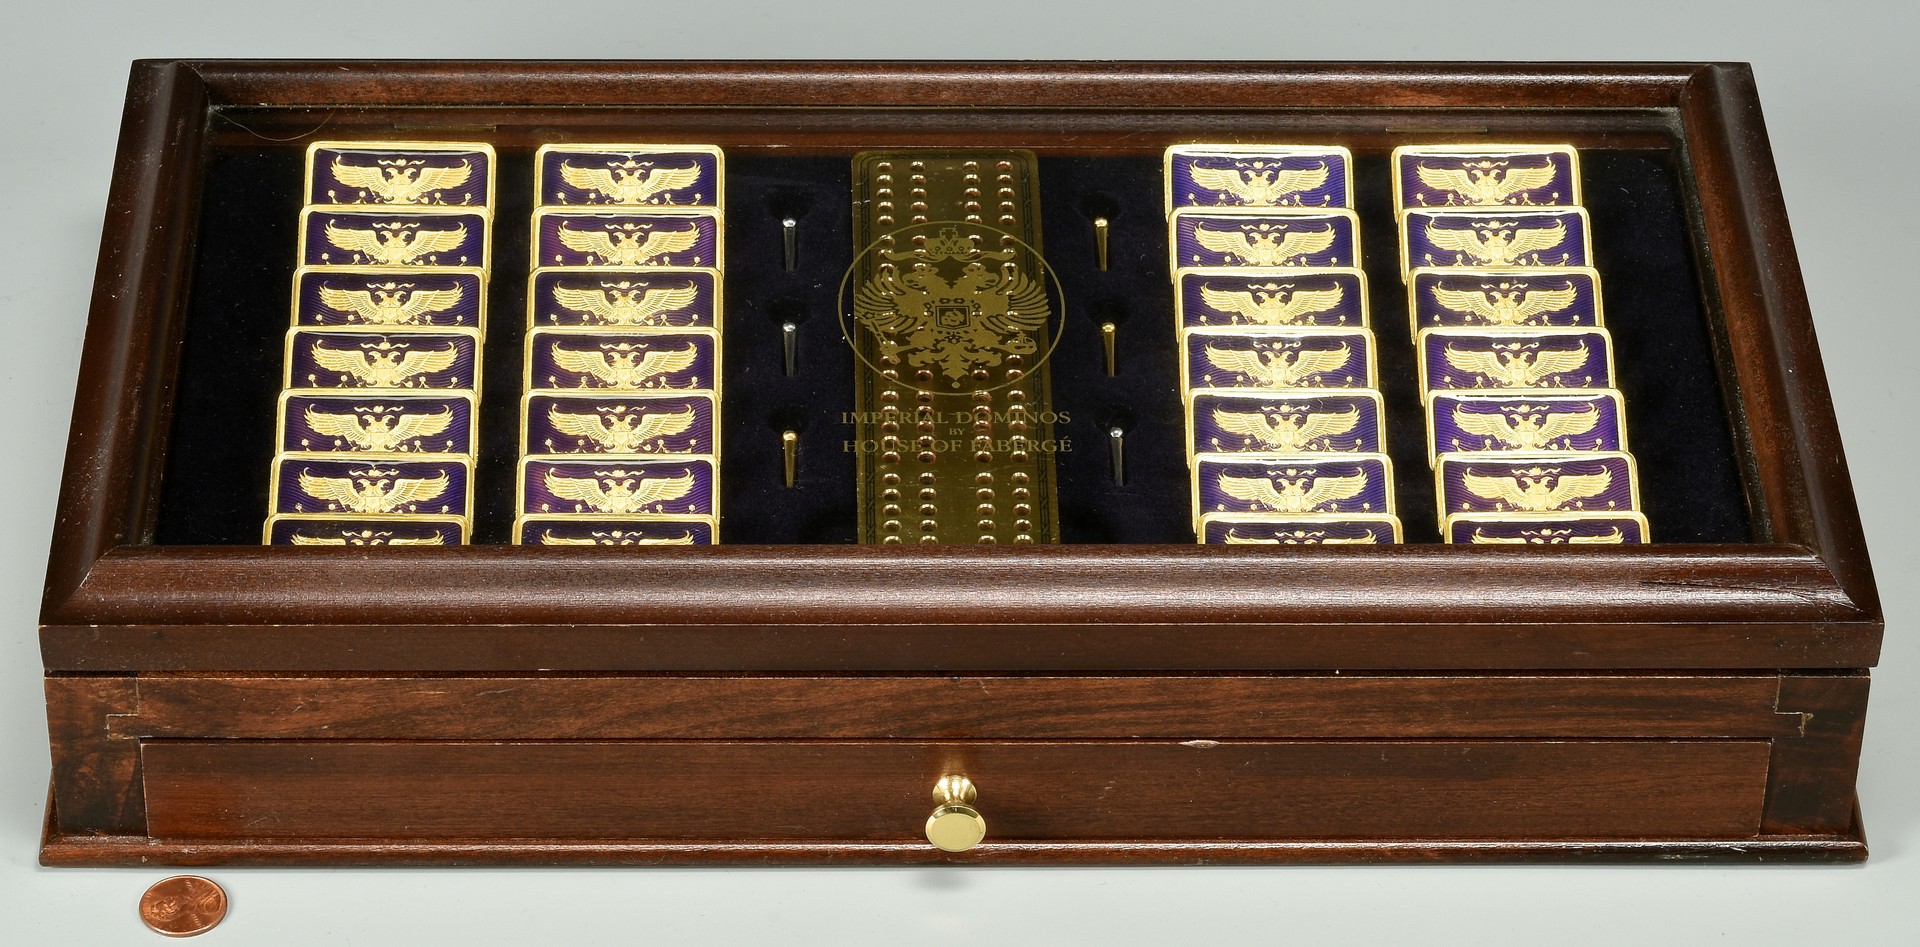 Lot 894: House of Faberge Imperial Dominos